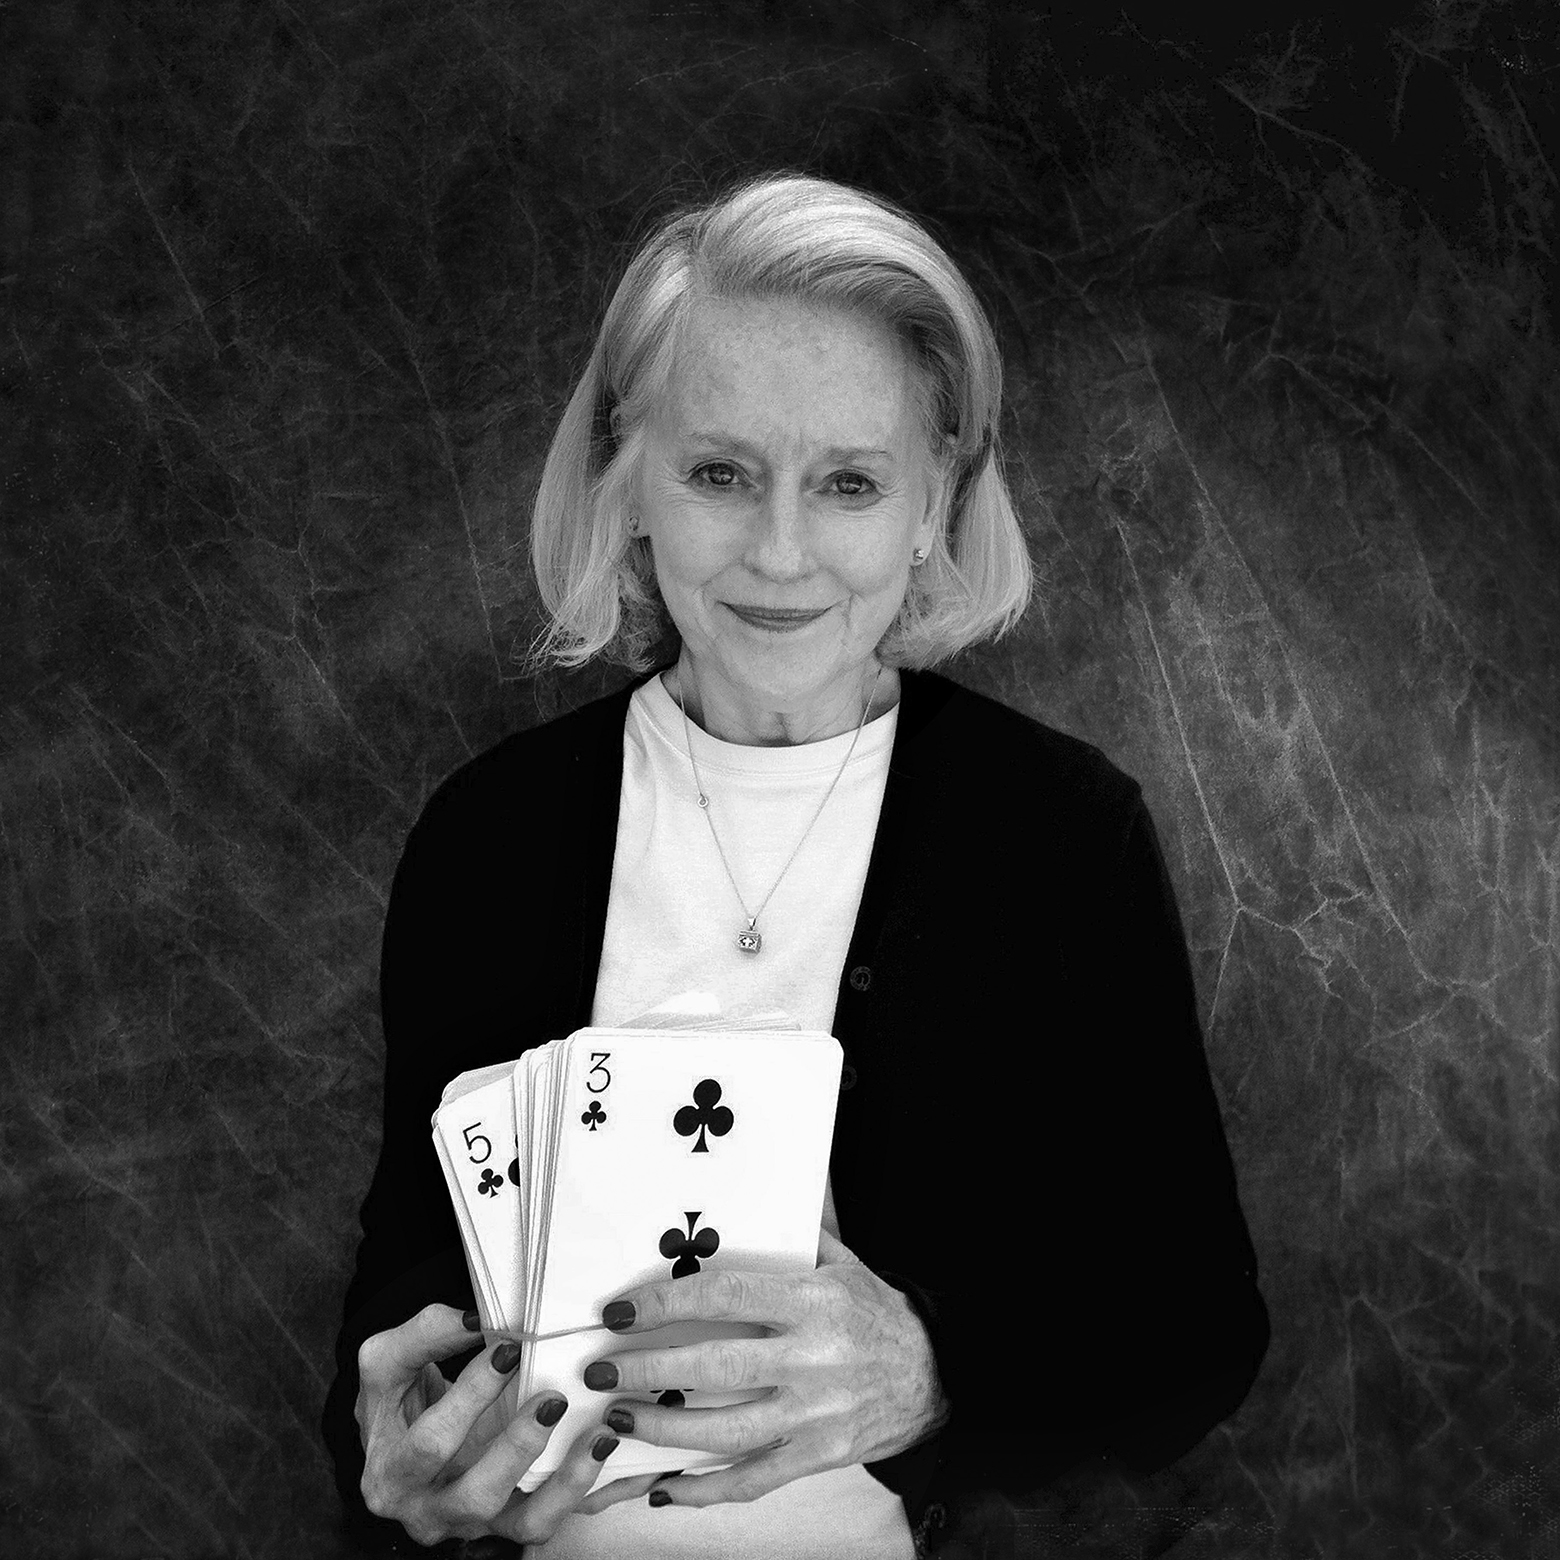 An older woman with a closed-mouth smile in a white T-shirt and black sweater holds up an outsize deck of playing cards with a rubber band around it and the three and five of clubs are visible.